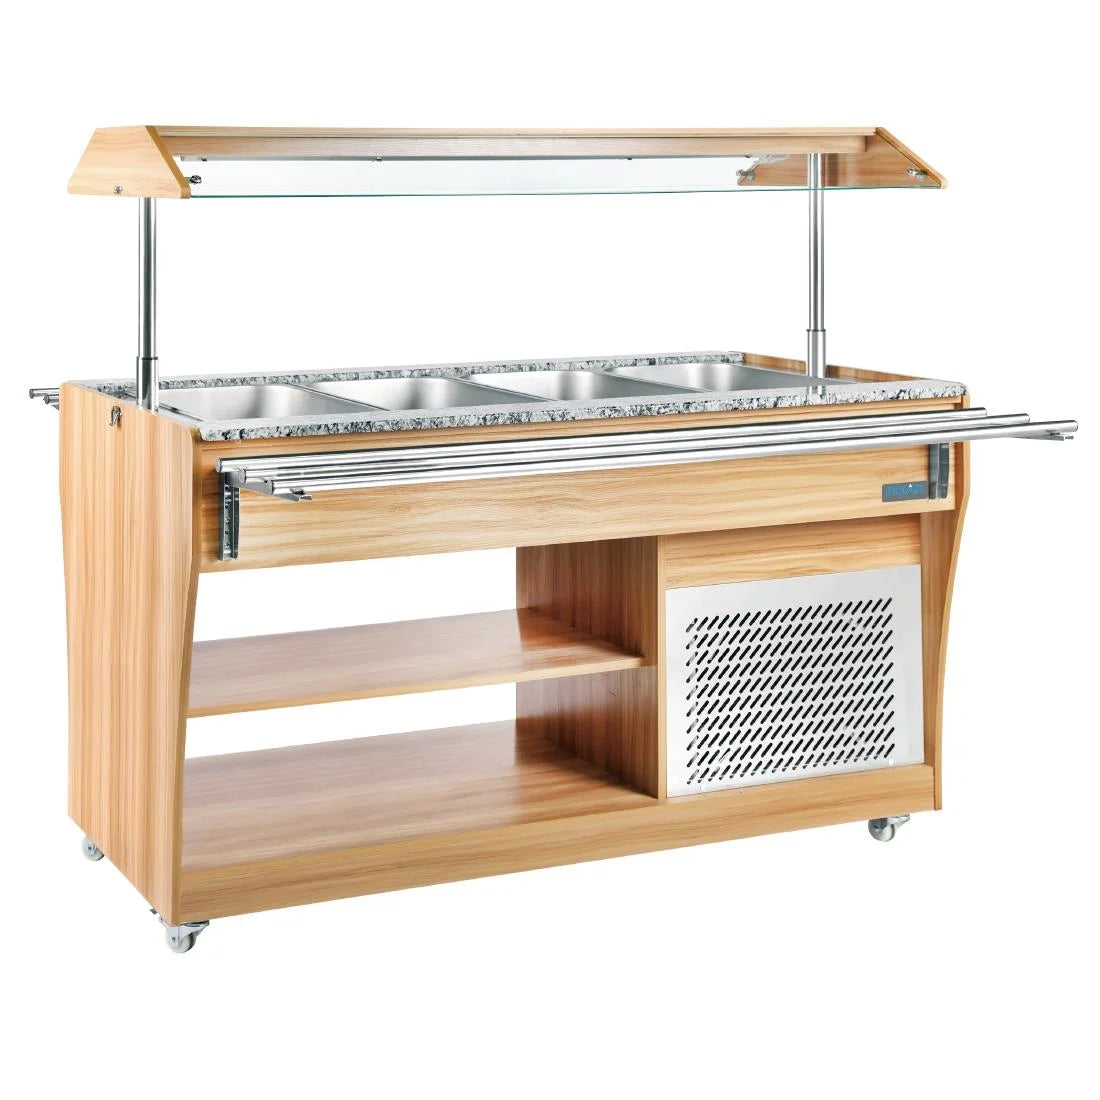 Polar G-Series Refrigerated Buffet Bar.Product Ref:00686.Model: CR899. 🚚 1-3 Days Delivery